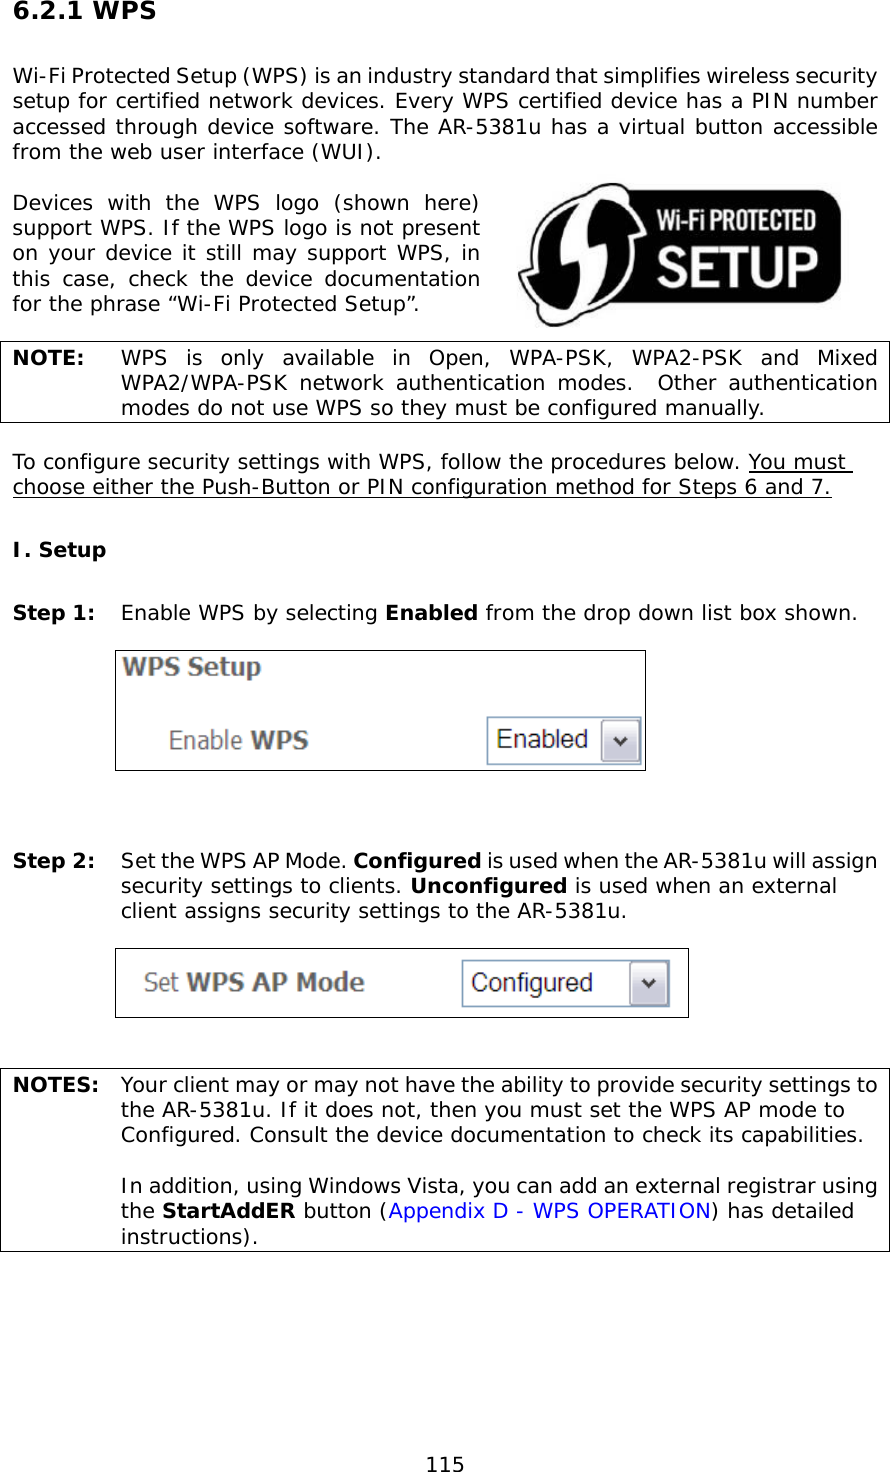  115 6.2.1 WPS Wi-Fi Protected Setup (WPS) is an industry standard that simplifies wireless security setup for certified network devices. Every WPS certified device has a PIN number accessed through device software. The AR-5381u has a virtual button accessible from the web user interface (WUI).  Devices with the WPS logo (shown here) support WPS. If the WPS logo is not present on your device it still may support WPS, in this case, check the device documentation for the phrase “Wi-Fi Protected Setup”.  NOTE:  WPS is only available in Open, WPA-PSK, WPA2-PSK and Mixed WPA2/WPA-PSK network authentication modes.  Other authentication modes do not use WPS so they must be configured manually.  To configure security settings with WPS, follow the procedures below. You must choose either the Push-Button or PIN configuration method for Steps 6 and 7. I. Setup Step 1:  Enable WPS by selecting Enabled from the drop down list box shown.       Step 2:  Set the WPS AP Mode. Configured is used when the AR-5381u will assign security settings to clients. Unconfigured is used when an external client assigns security settings to the AR-5381u.      NOTES:  Your client may or may not have the ability to provide security settings to the AR-5381u. If it does not, then you must set the WPS AP mode to Configured. Consult the device documentation to check its capabilities.    In addition, using Windows Vista, you can add an external registrar using the StartAddER button (Appendix D - WPS OPERATION) has detailed instructions).   